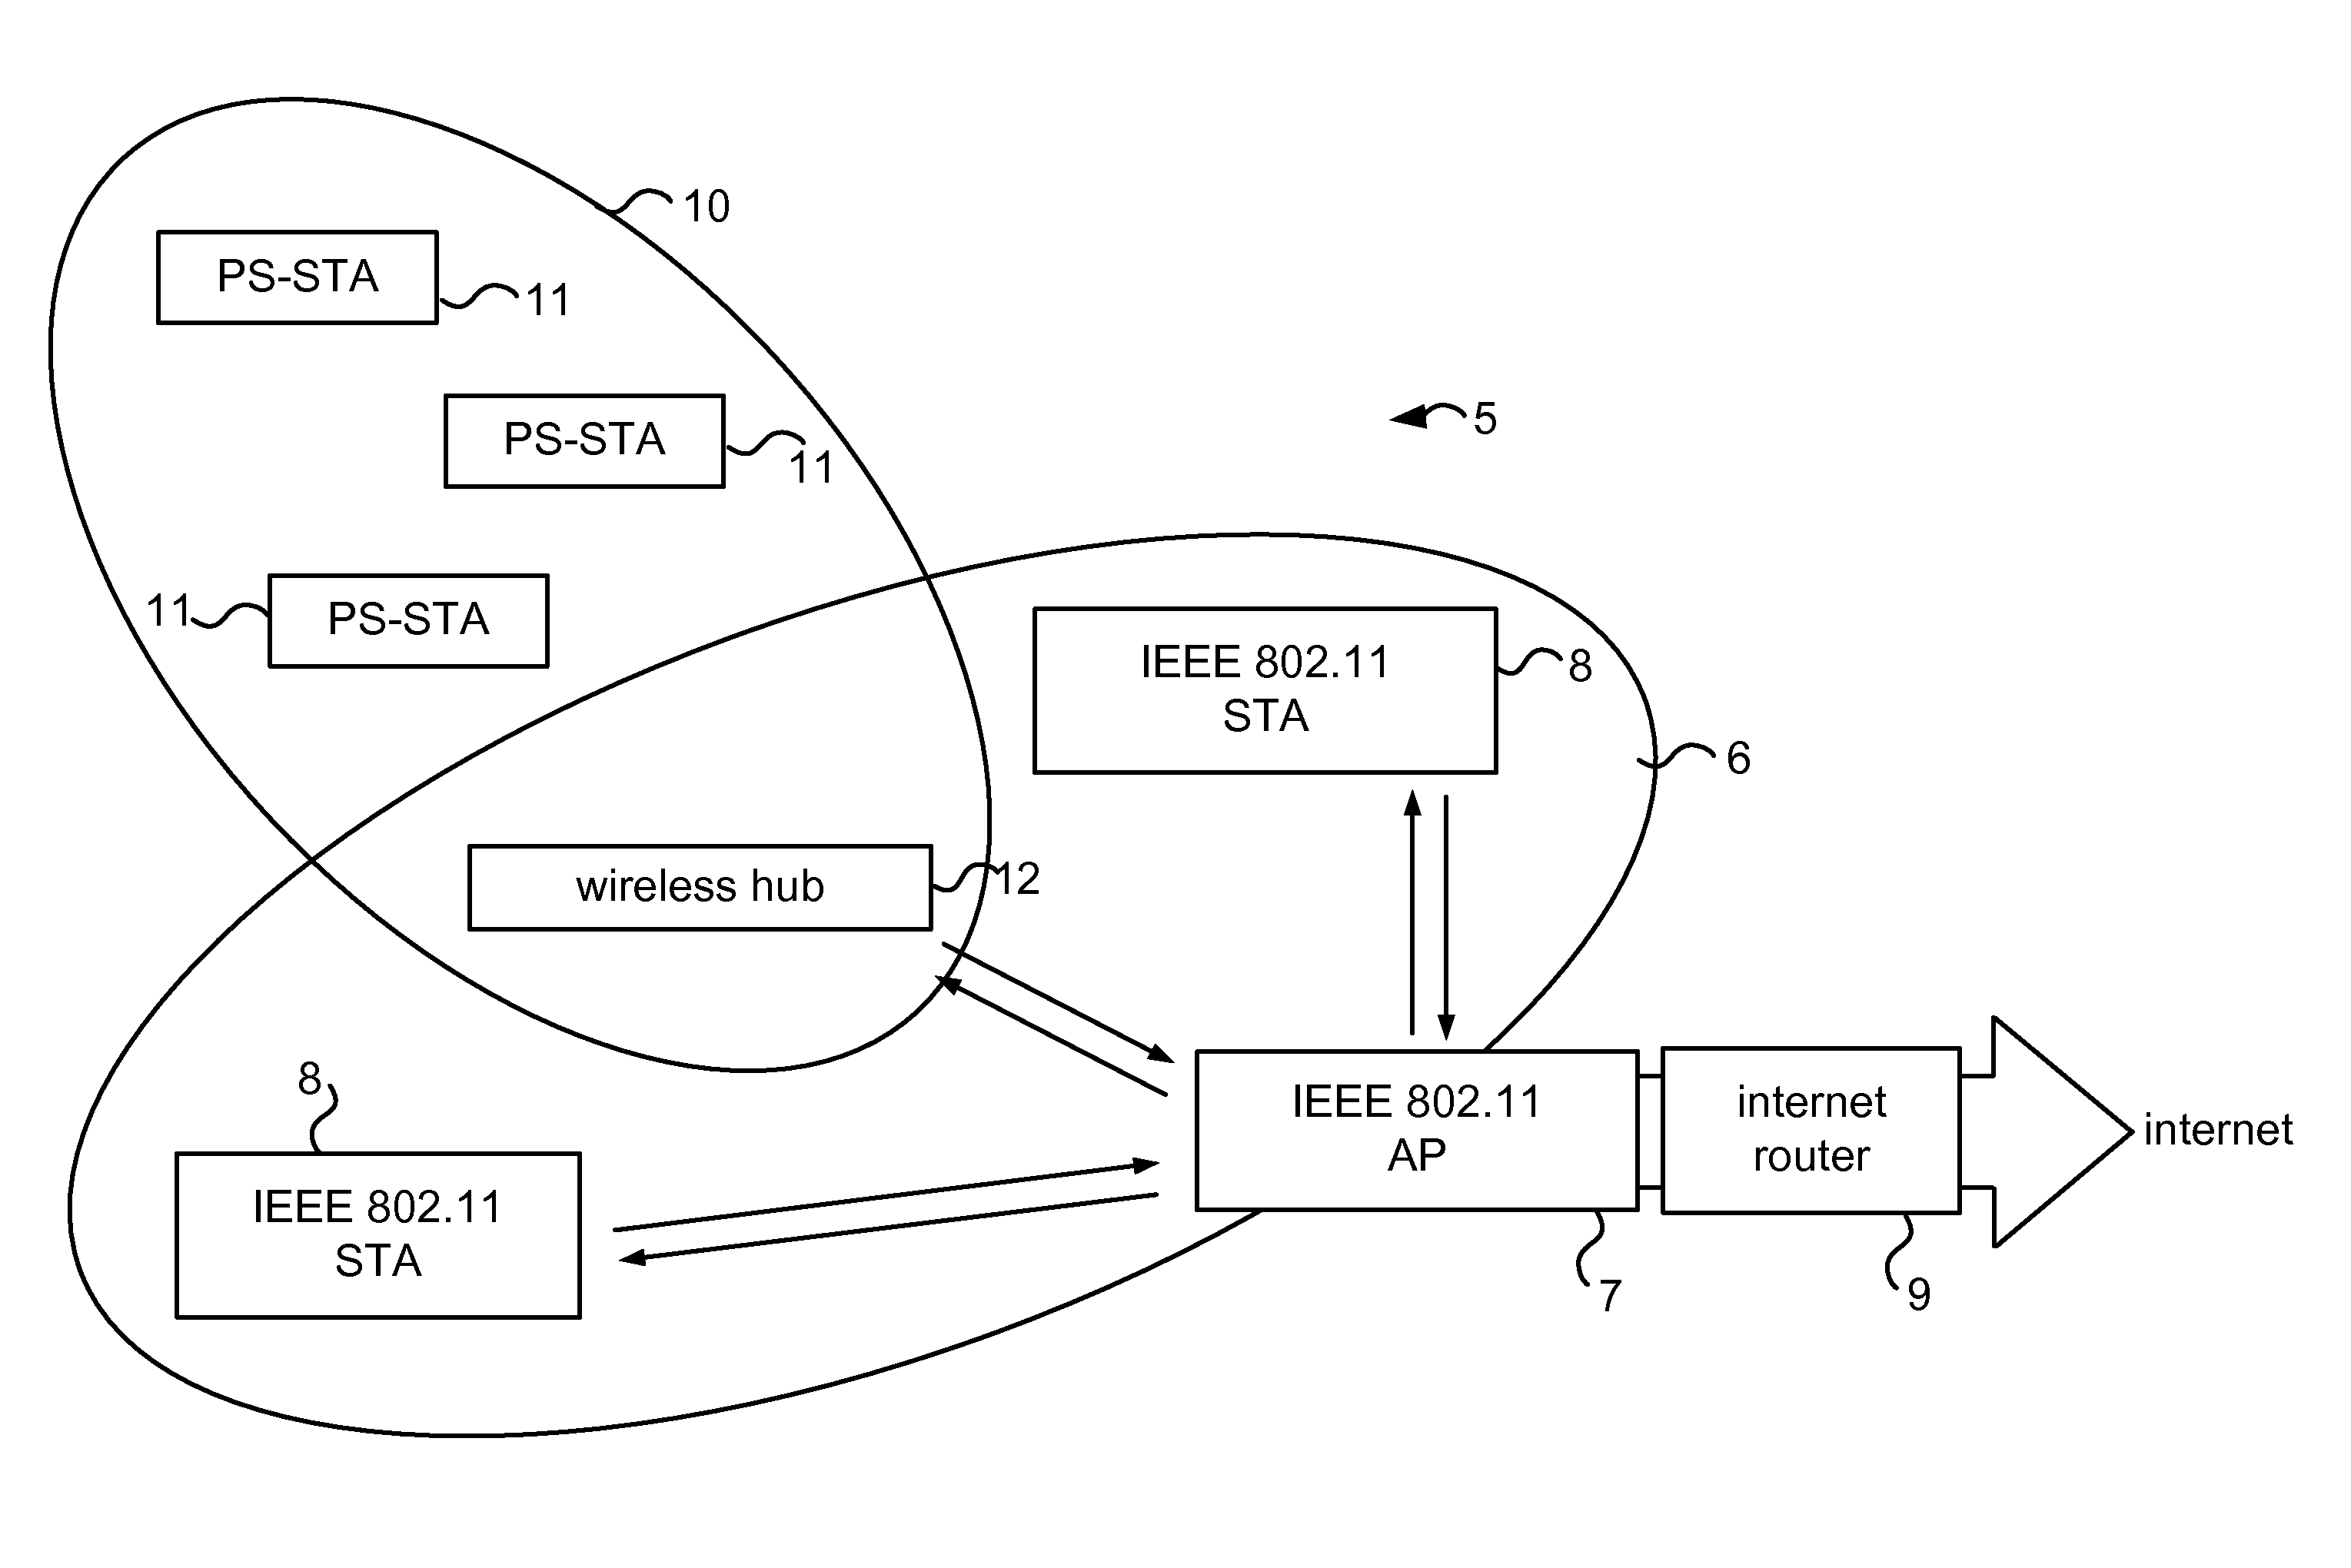 Apparatus and method for integrating short-range wireless personal area networks for a wireless local area network infrastructure